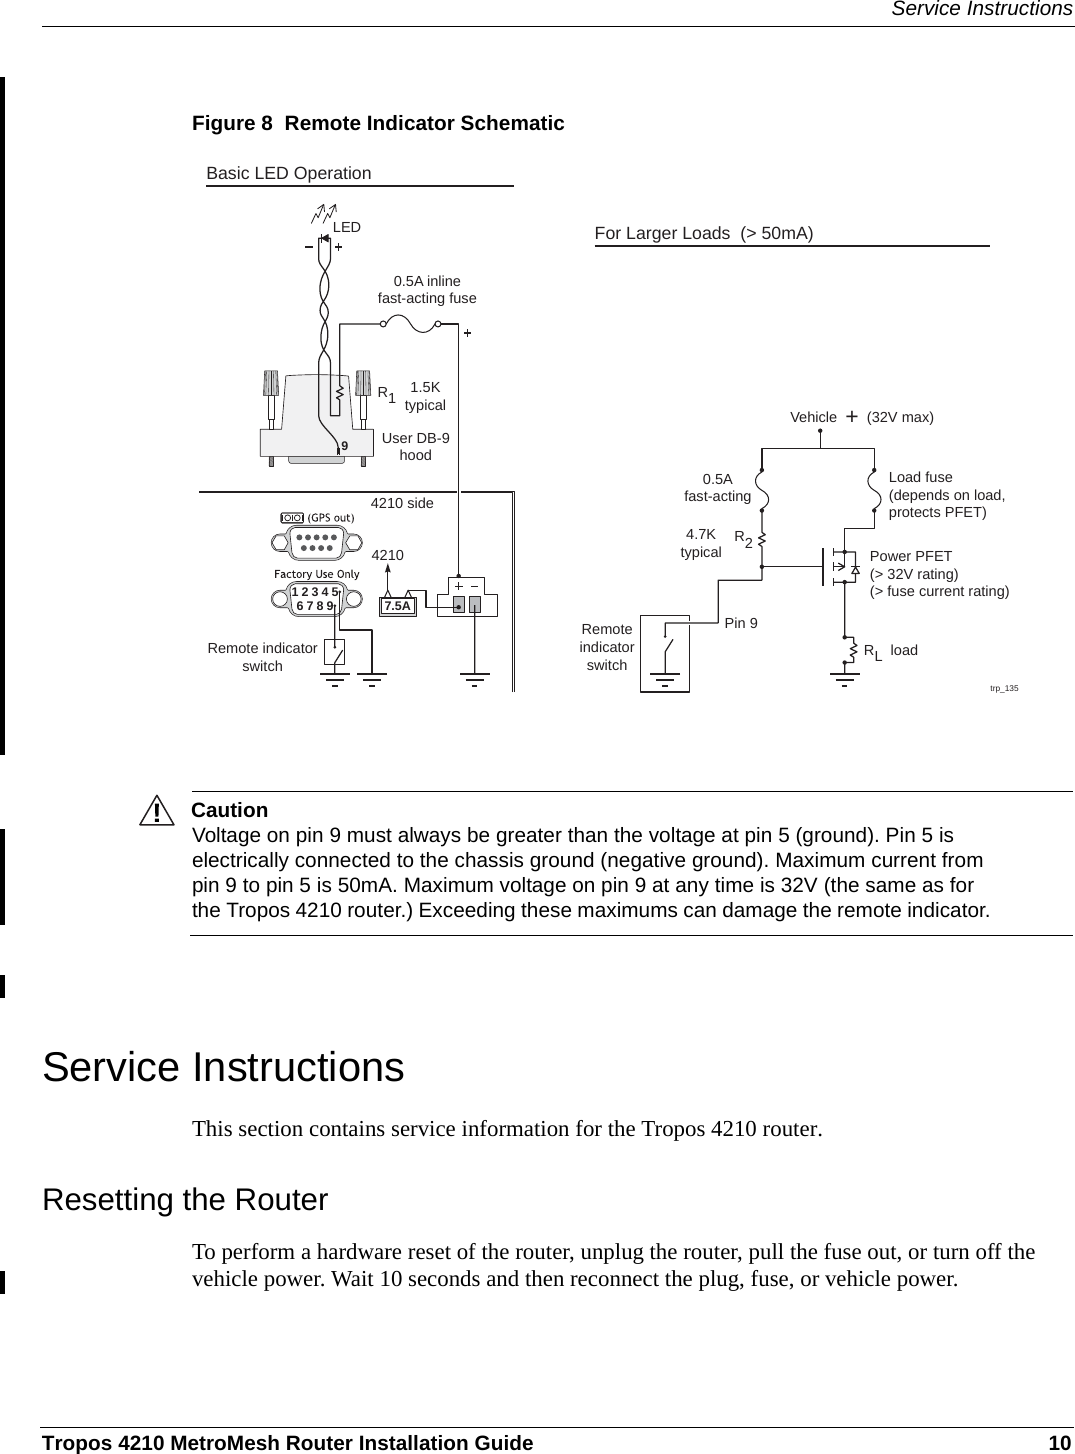 Service InstructionsTropos 4210 MetroMesh Router Installation Guide 10Figure 8  Remote Indicator SchematicCautionVoltage on pin 9 must always be greater than the voltage at pin 5 (ground). Pin 5 is electrically connected to the chassis ground (negative ground). Maximum current from pin 9 to pin 5 is 50mA. Maximum voltage on pin 9 at any time is 32V (the same as for the Tropos 4210 router.) Exceeding these maximums can damage the remote indicator.Service InstructionsThis section contains service information for the Tropos 4210 router.Resetting the RouterTo perform a hardware reset of the router, unplug the router, pull the fuse out, or turn off the vehicle power. Wait 10 seconds and then reconnect the plug, fuse, or vehicle power.trp_135For Larger Loads  (&gt; 50mA)42104210 side0.5A inlinefast-acting fuseLEDRemote indicatorswitch1543269 7.5A87RemoteindicatorswitchPin 9RL  loadPower PFET(&gt; 32V rating)(&gt; fuse current rating)Load fuse(depends on load,protects PFET)R2R14.7Ktypical1.5KtypicalUser DB-9hood0.5Afast-actingVehicle  +  (32V max)9Basic LED Operation